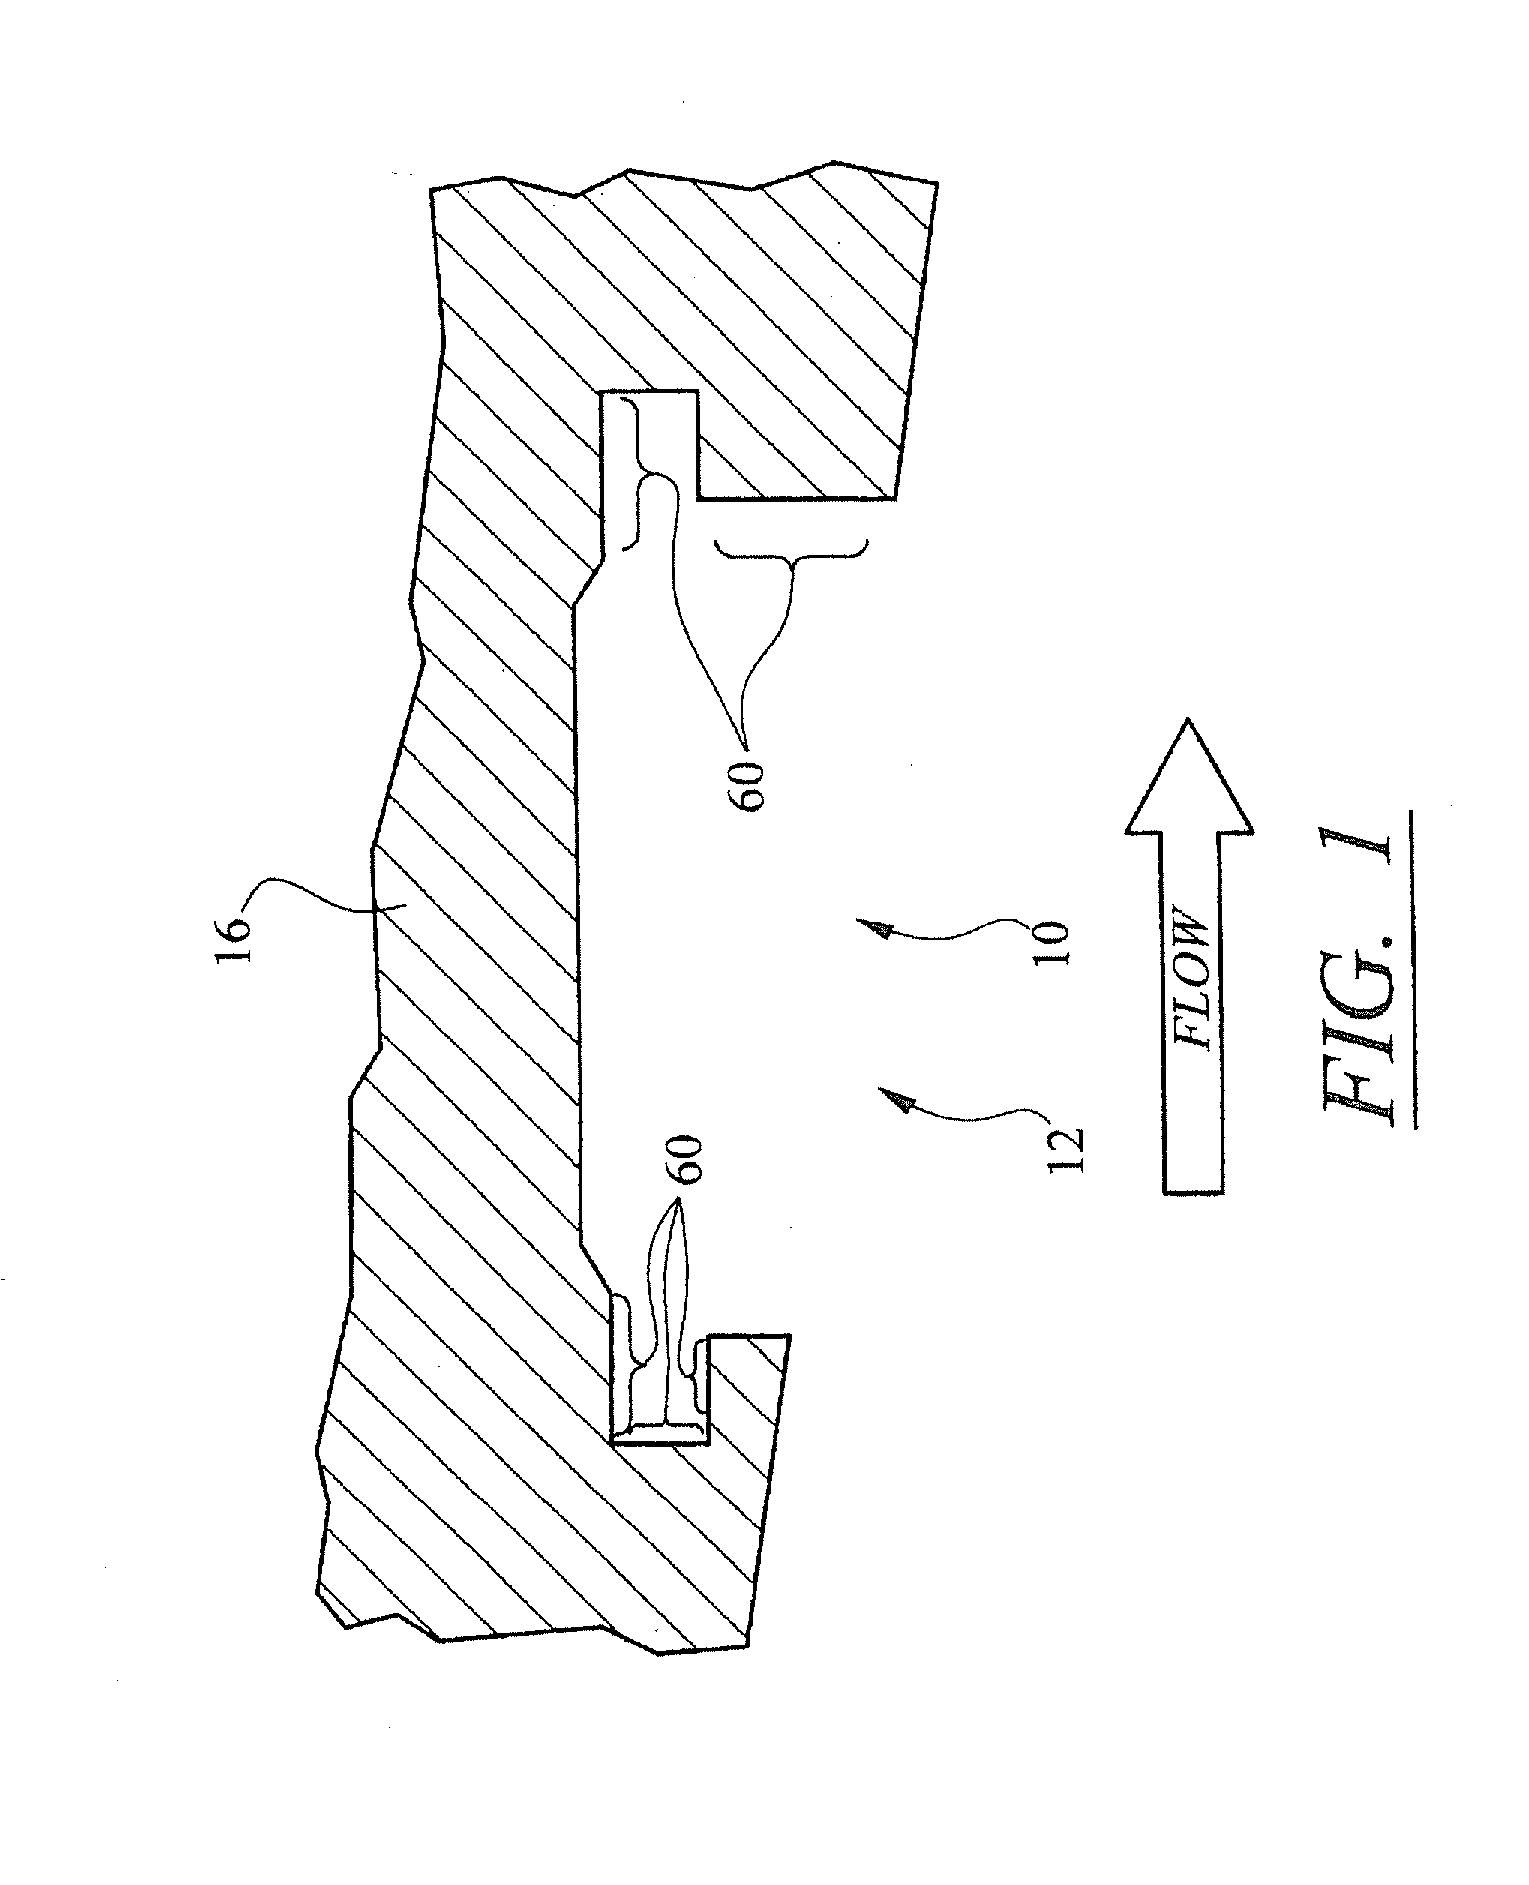 System for restoring turbine vane attachment systems in a turbine engine